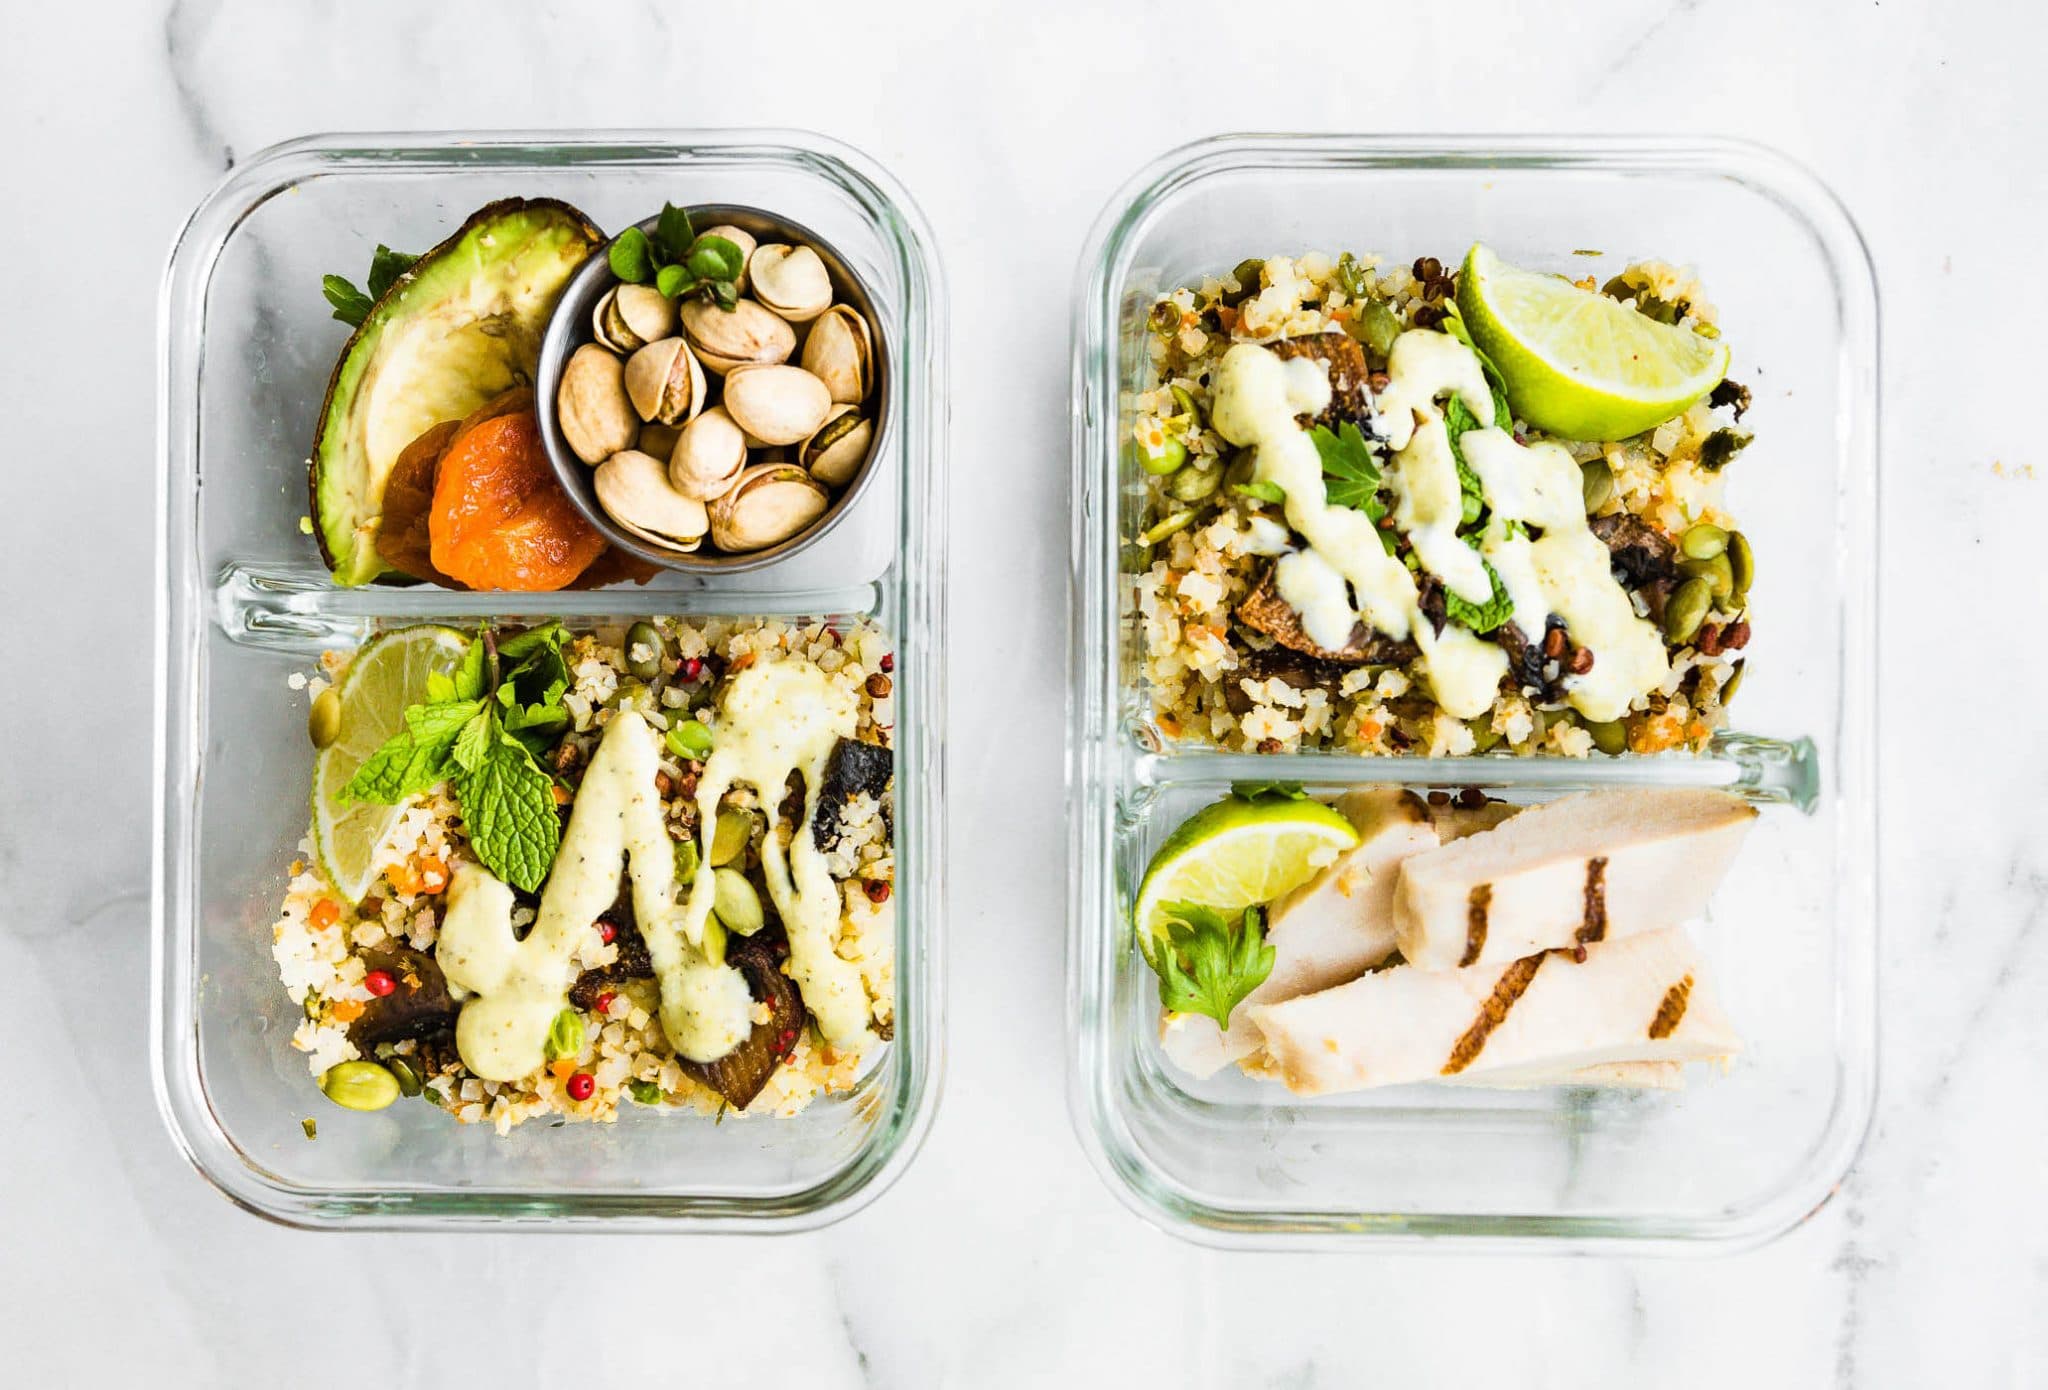 Two meal prep containers filled with Dukkah roasted vegetables and sliced chicken breast.